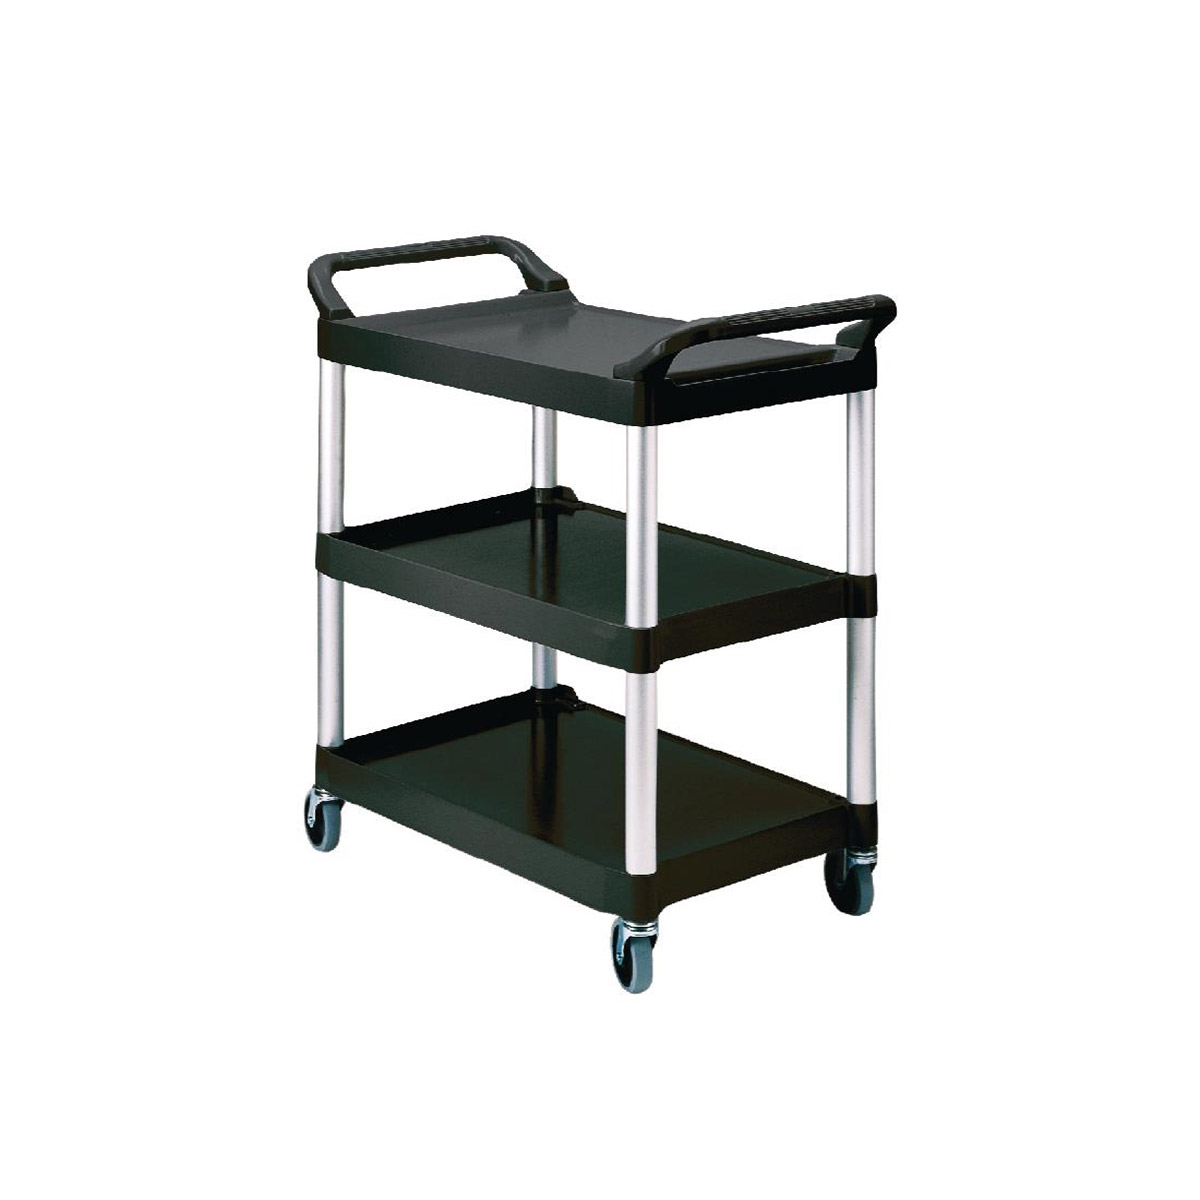 Rubbermaid Compact Utility Trolley Black